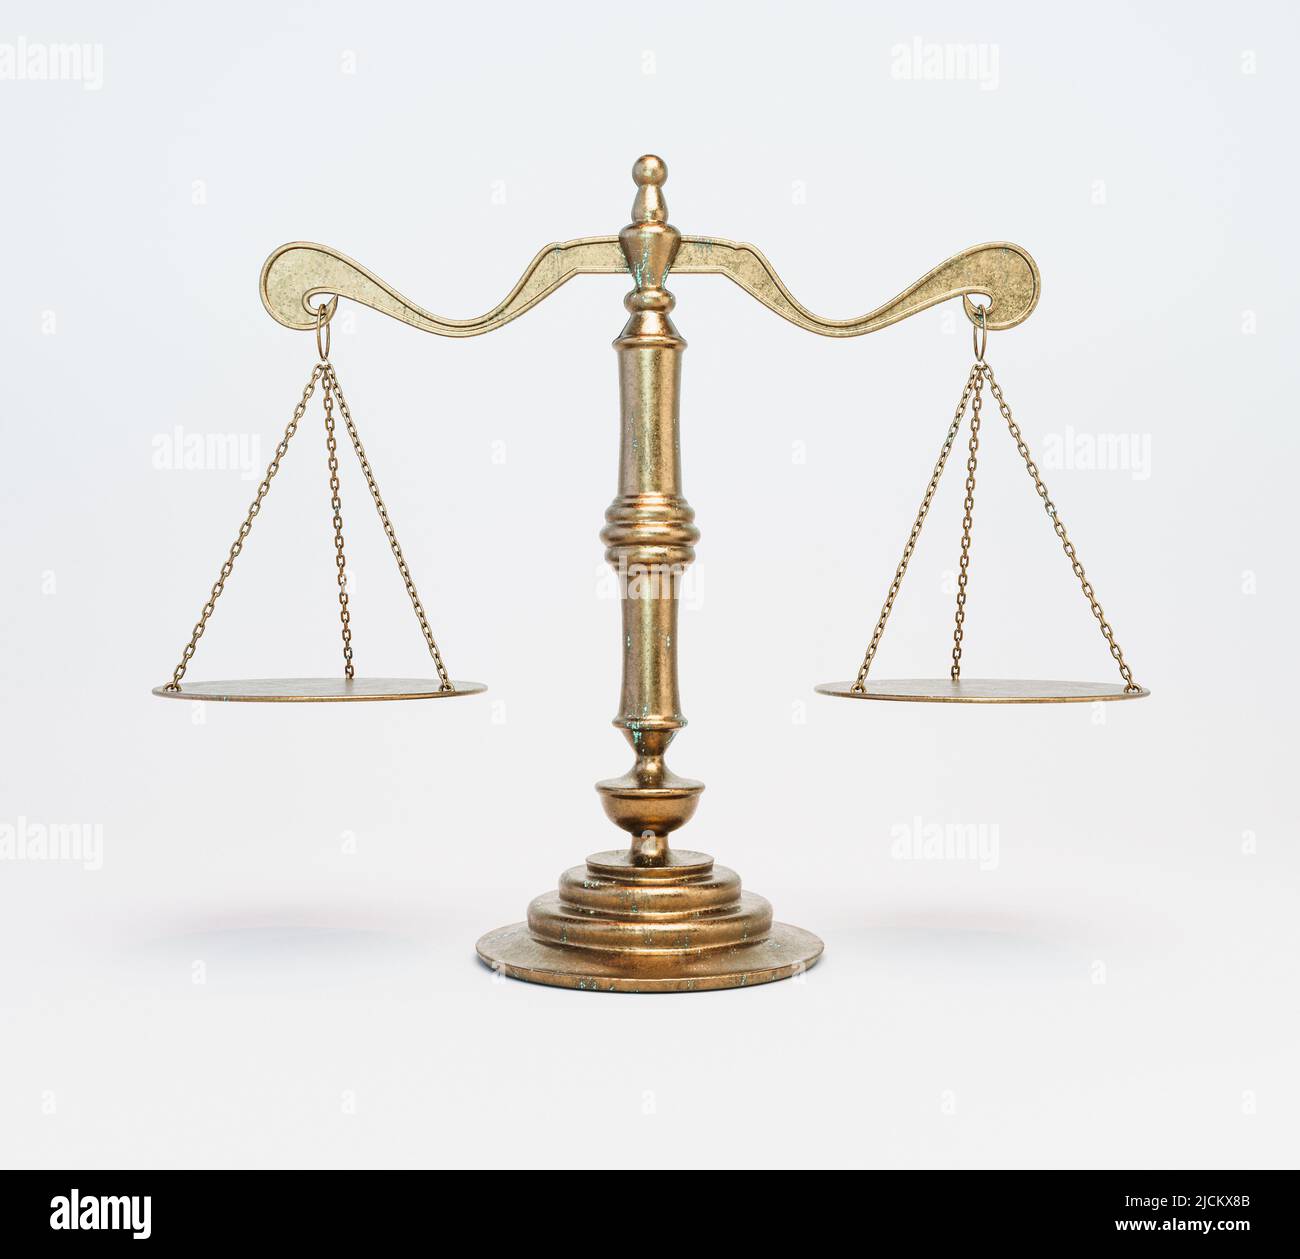 Ornate brass justice scales on a white isolated background - 3D render Stock Photo